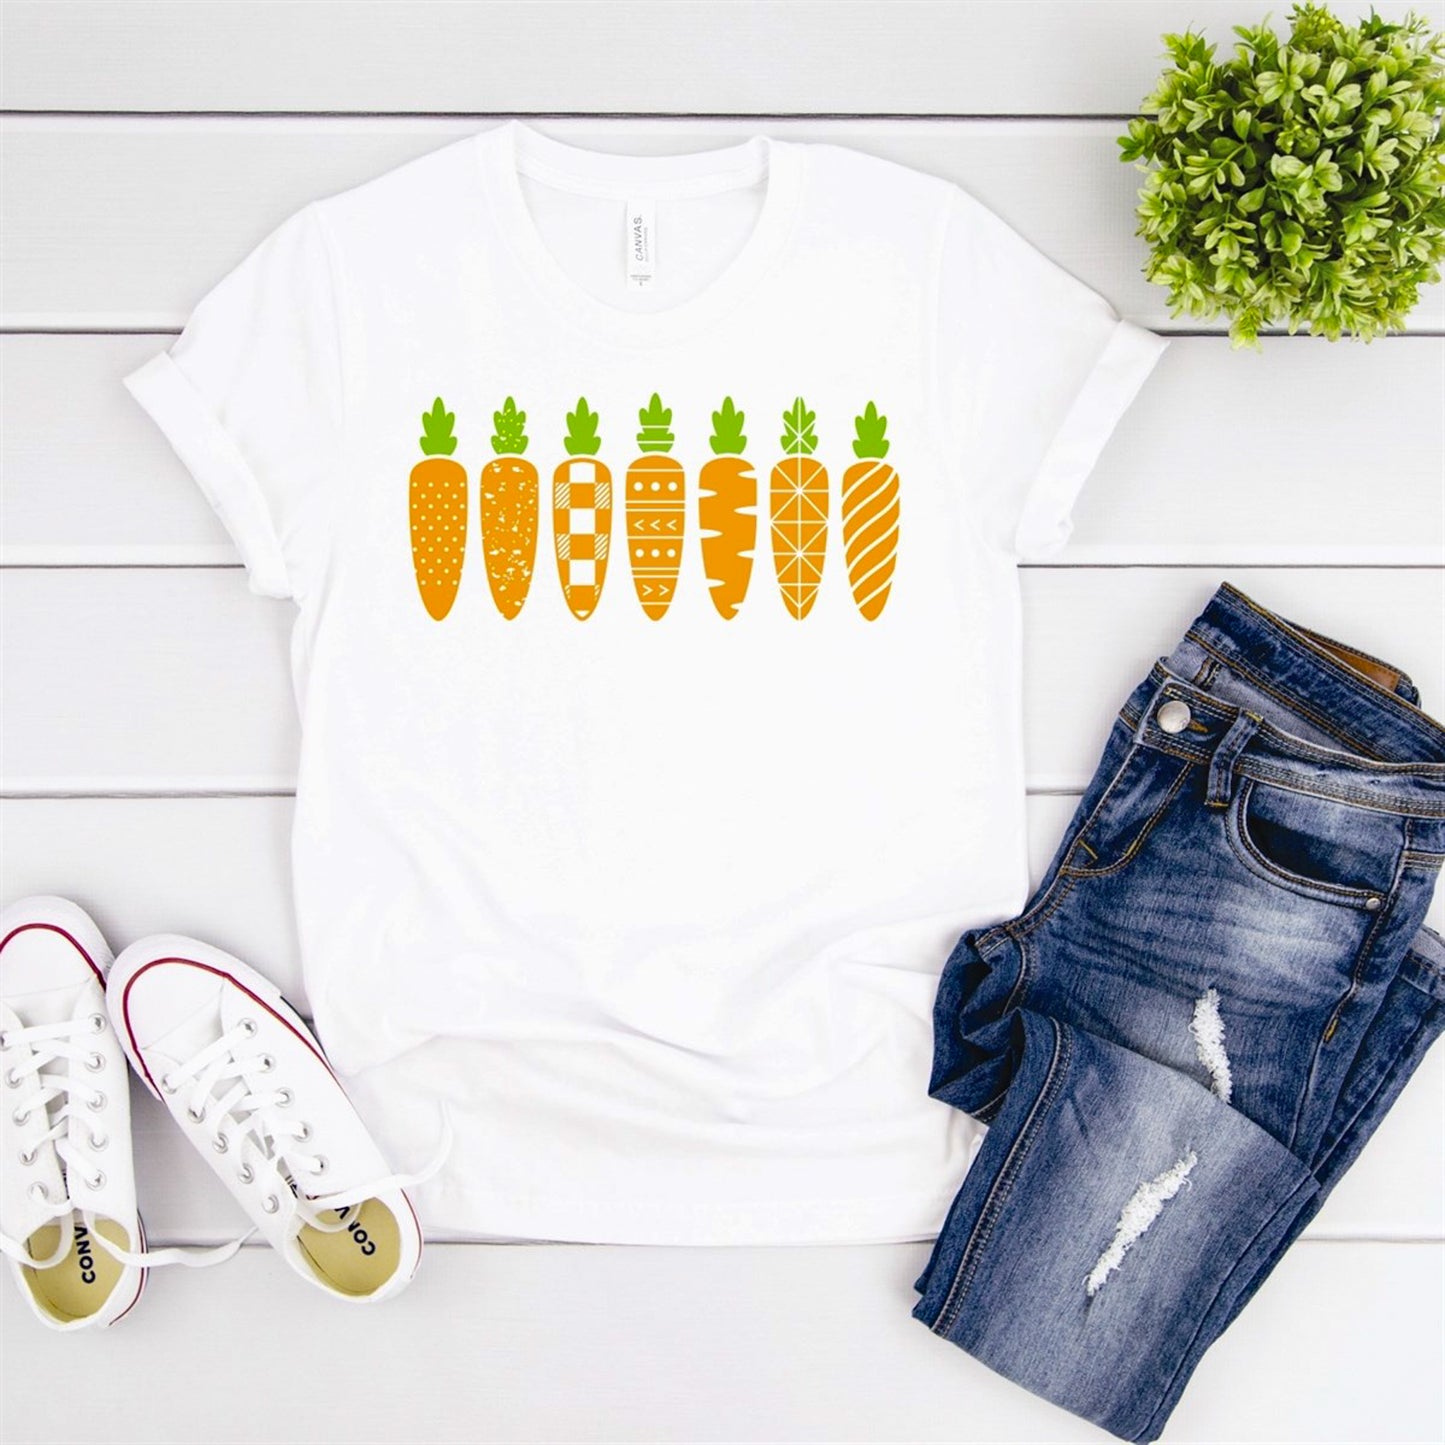 Patterned Carrots Tee